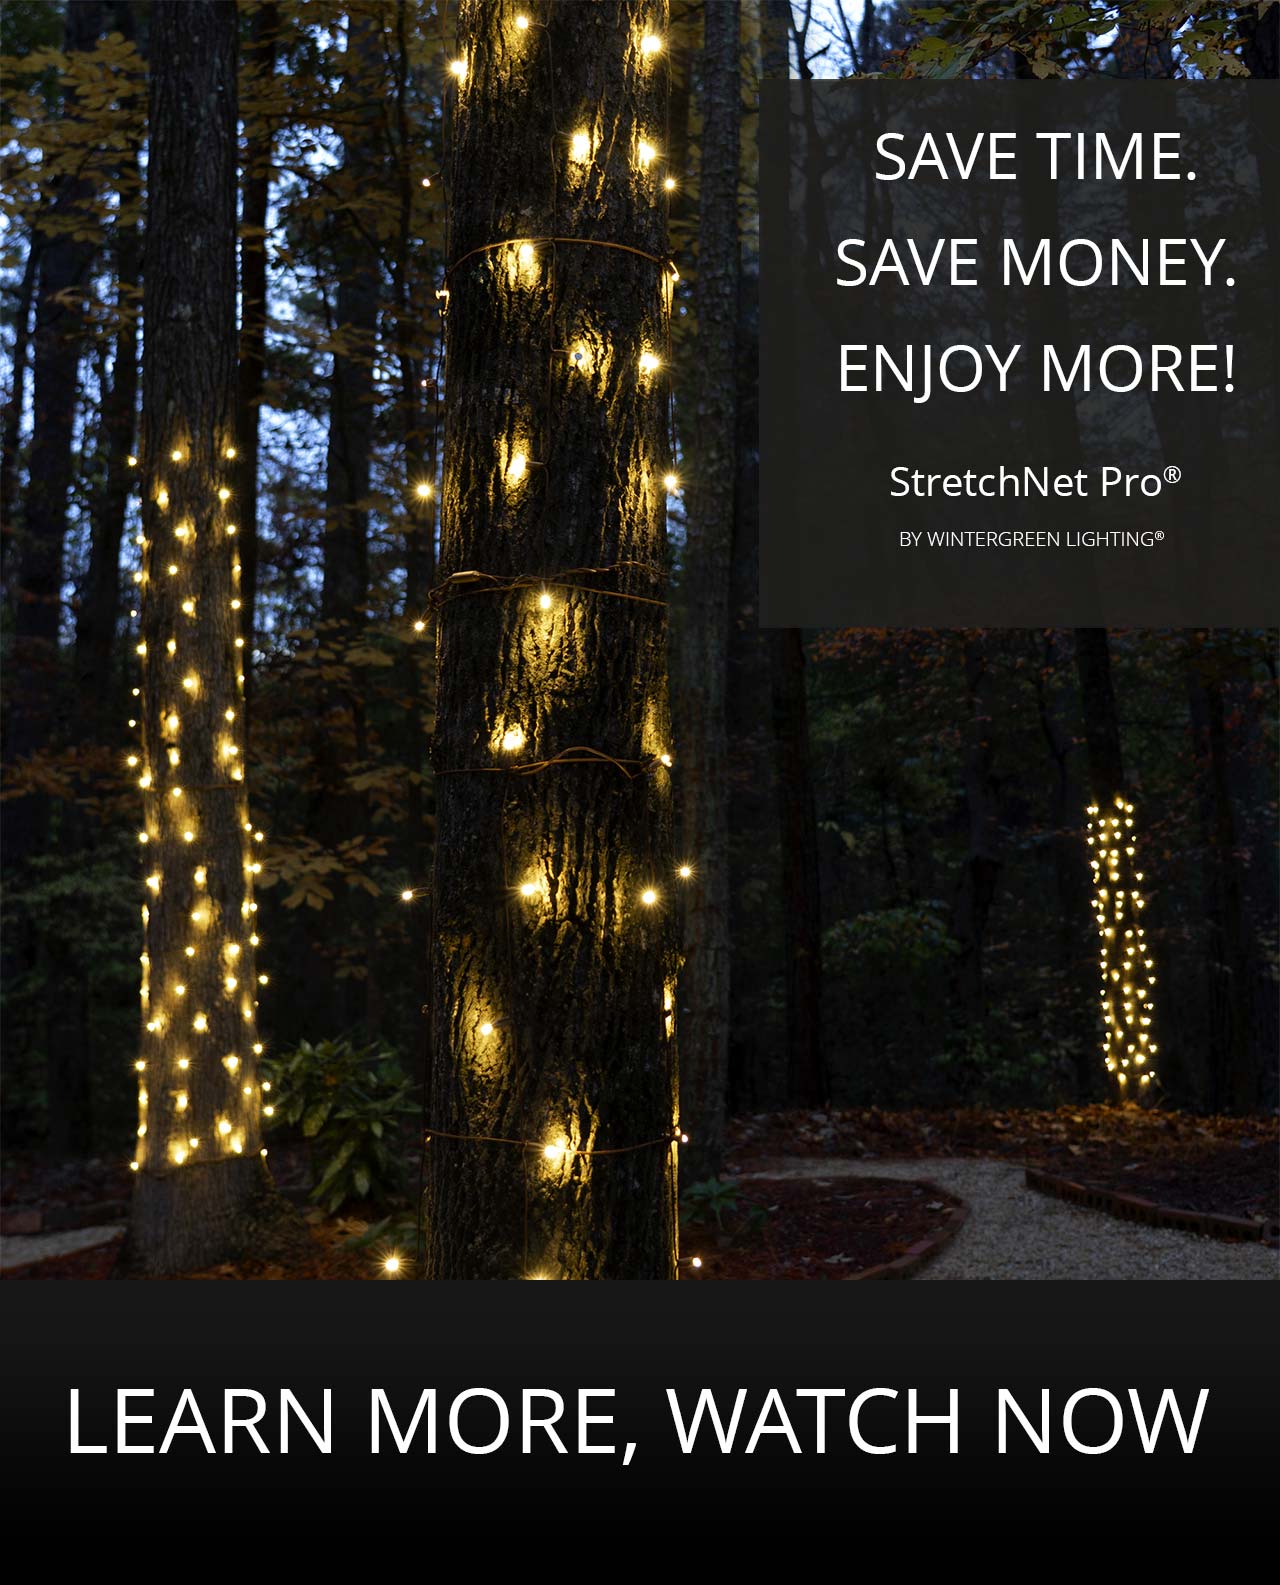 StretchNet Pro Net Lights For Wrapping Trees Quickly